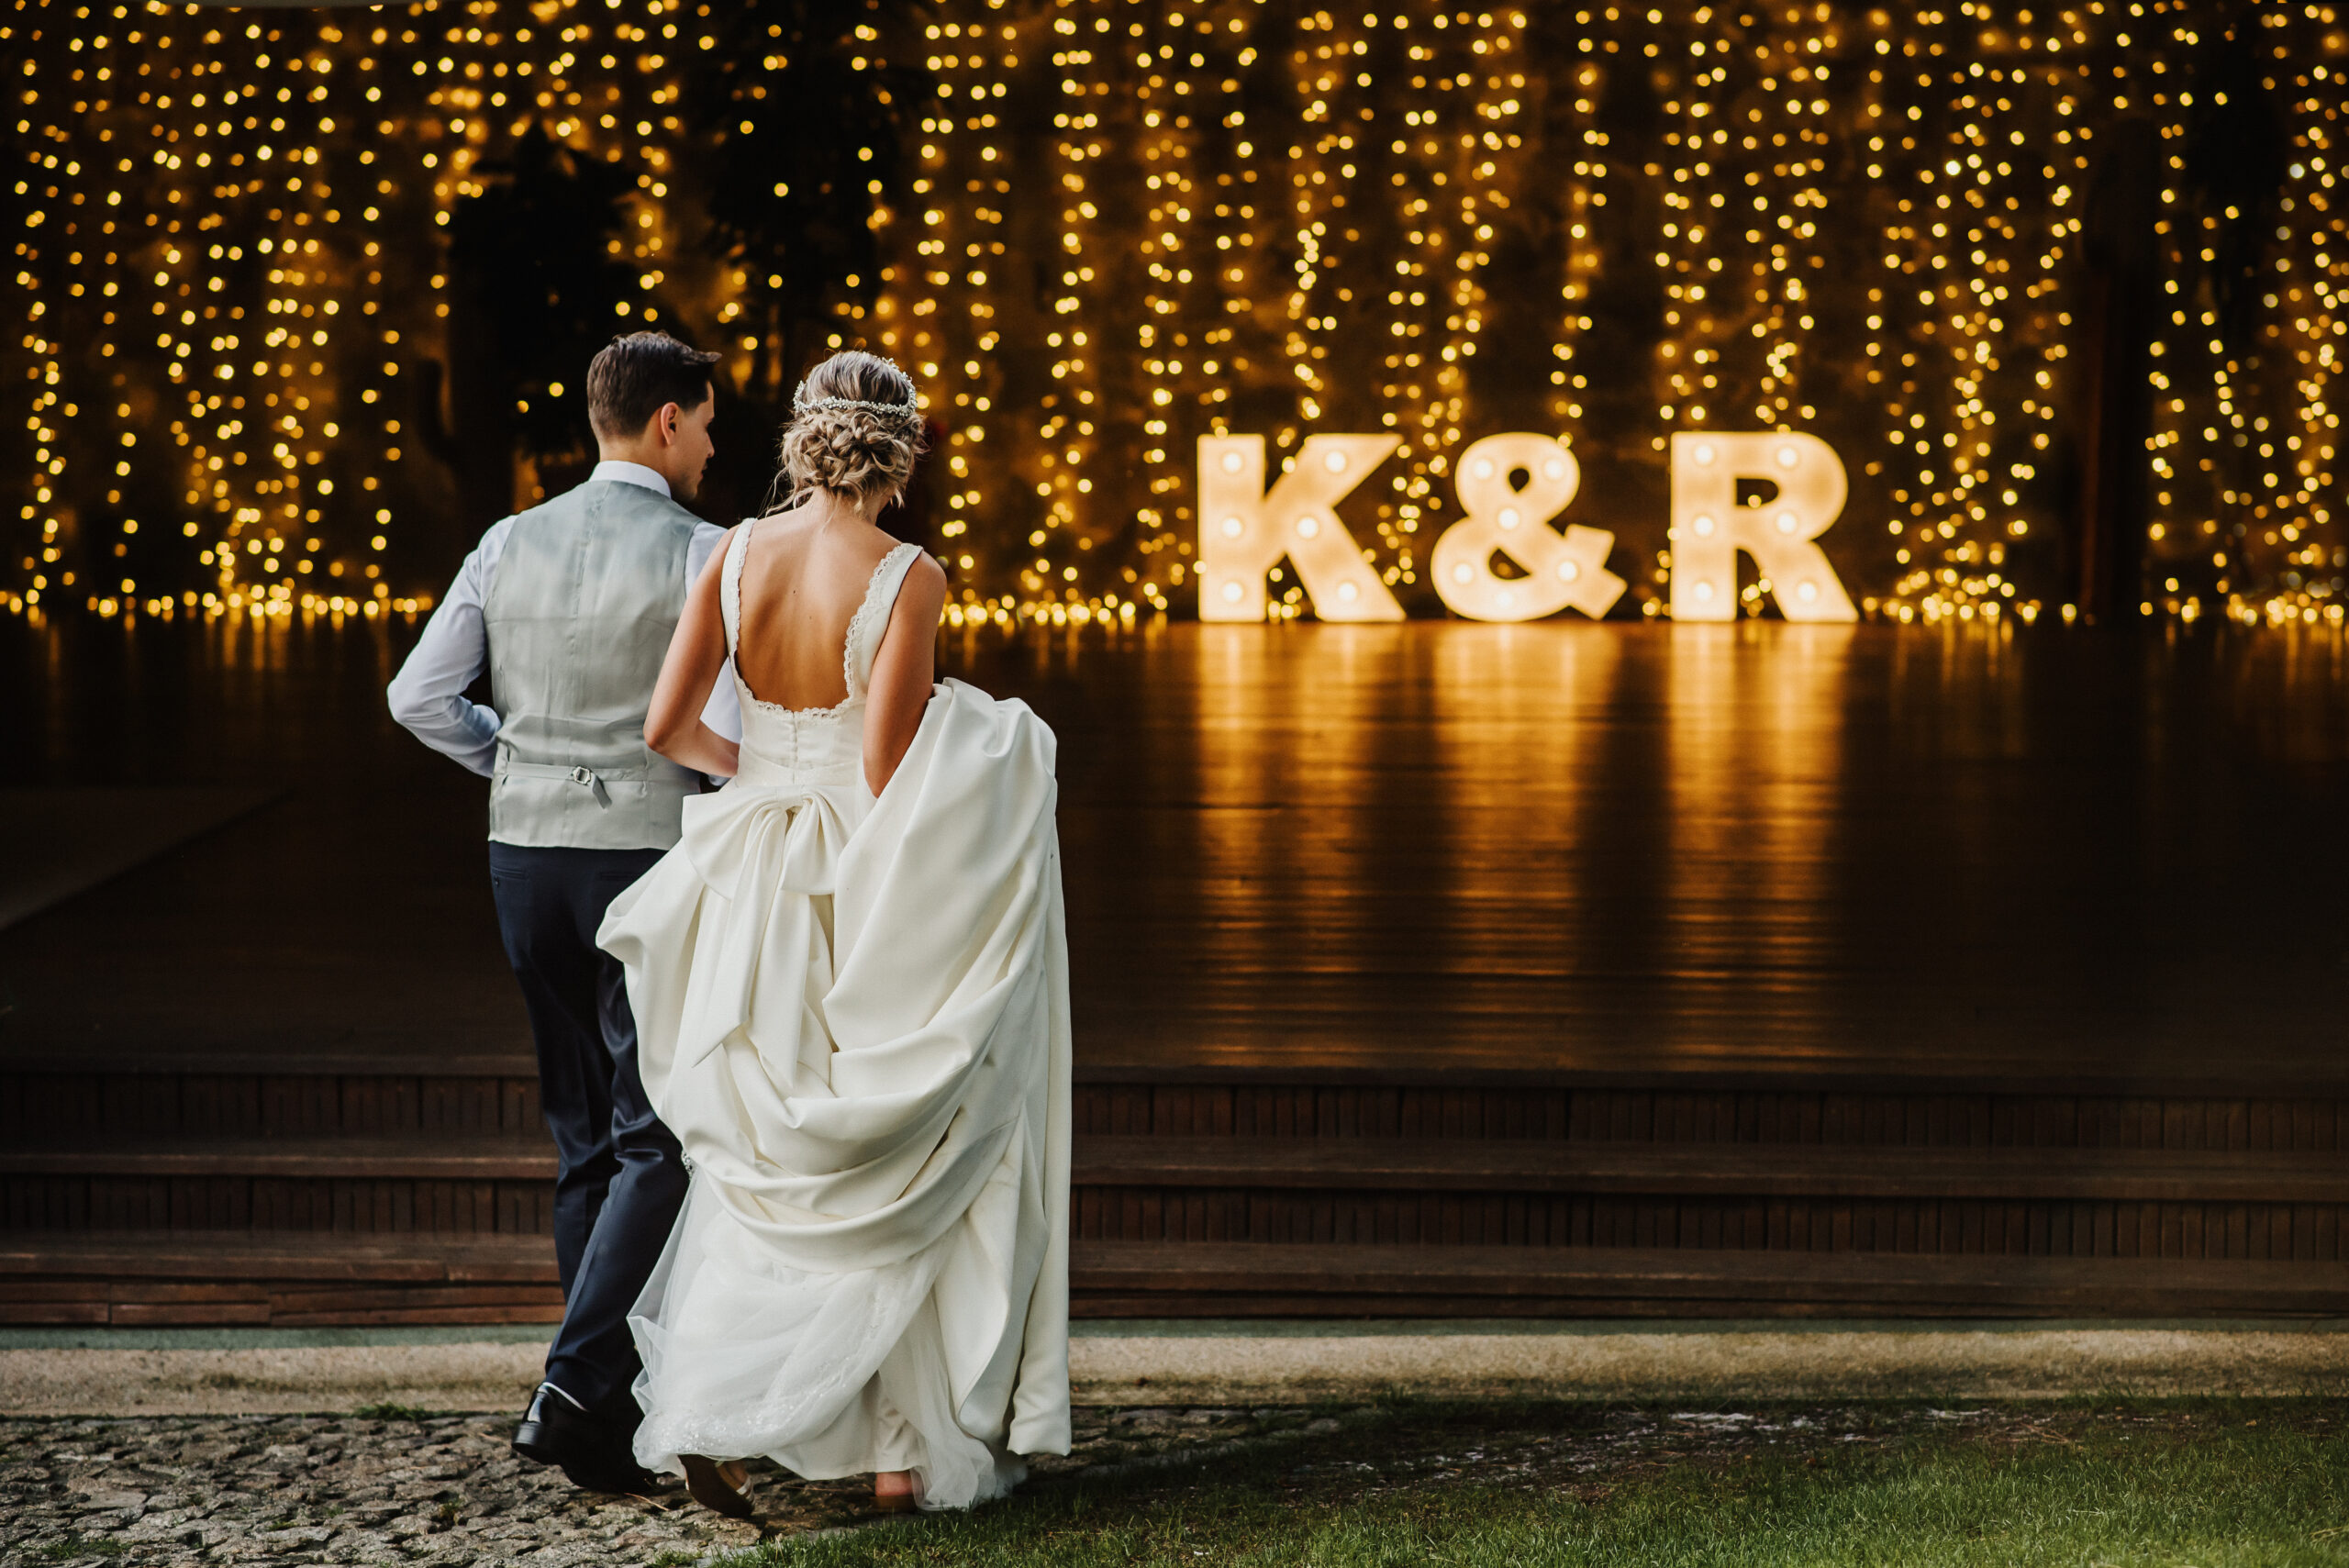 Young couple at their wedding walking towards a reception full of lights